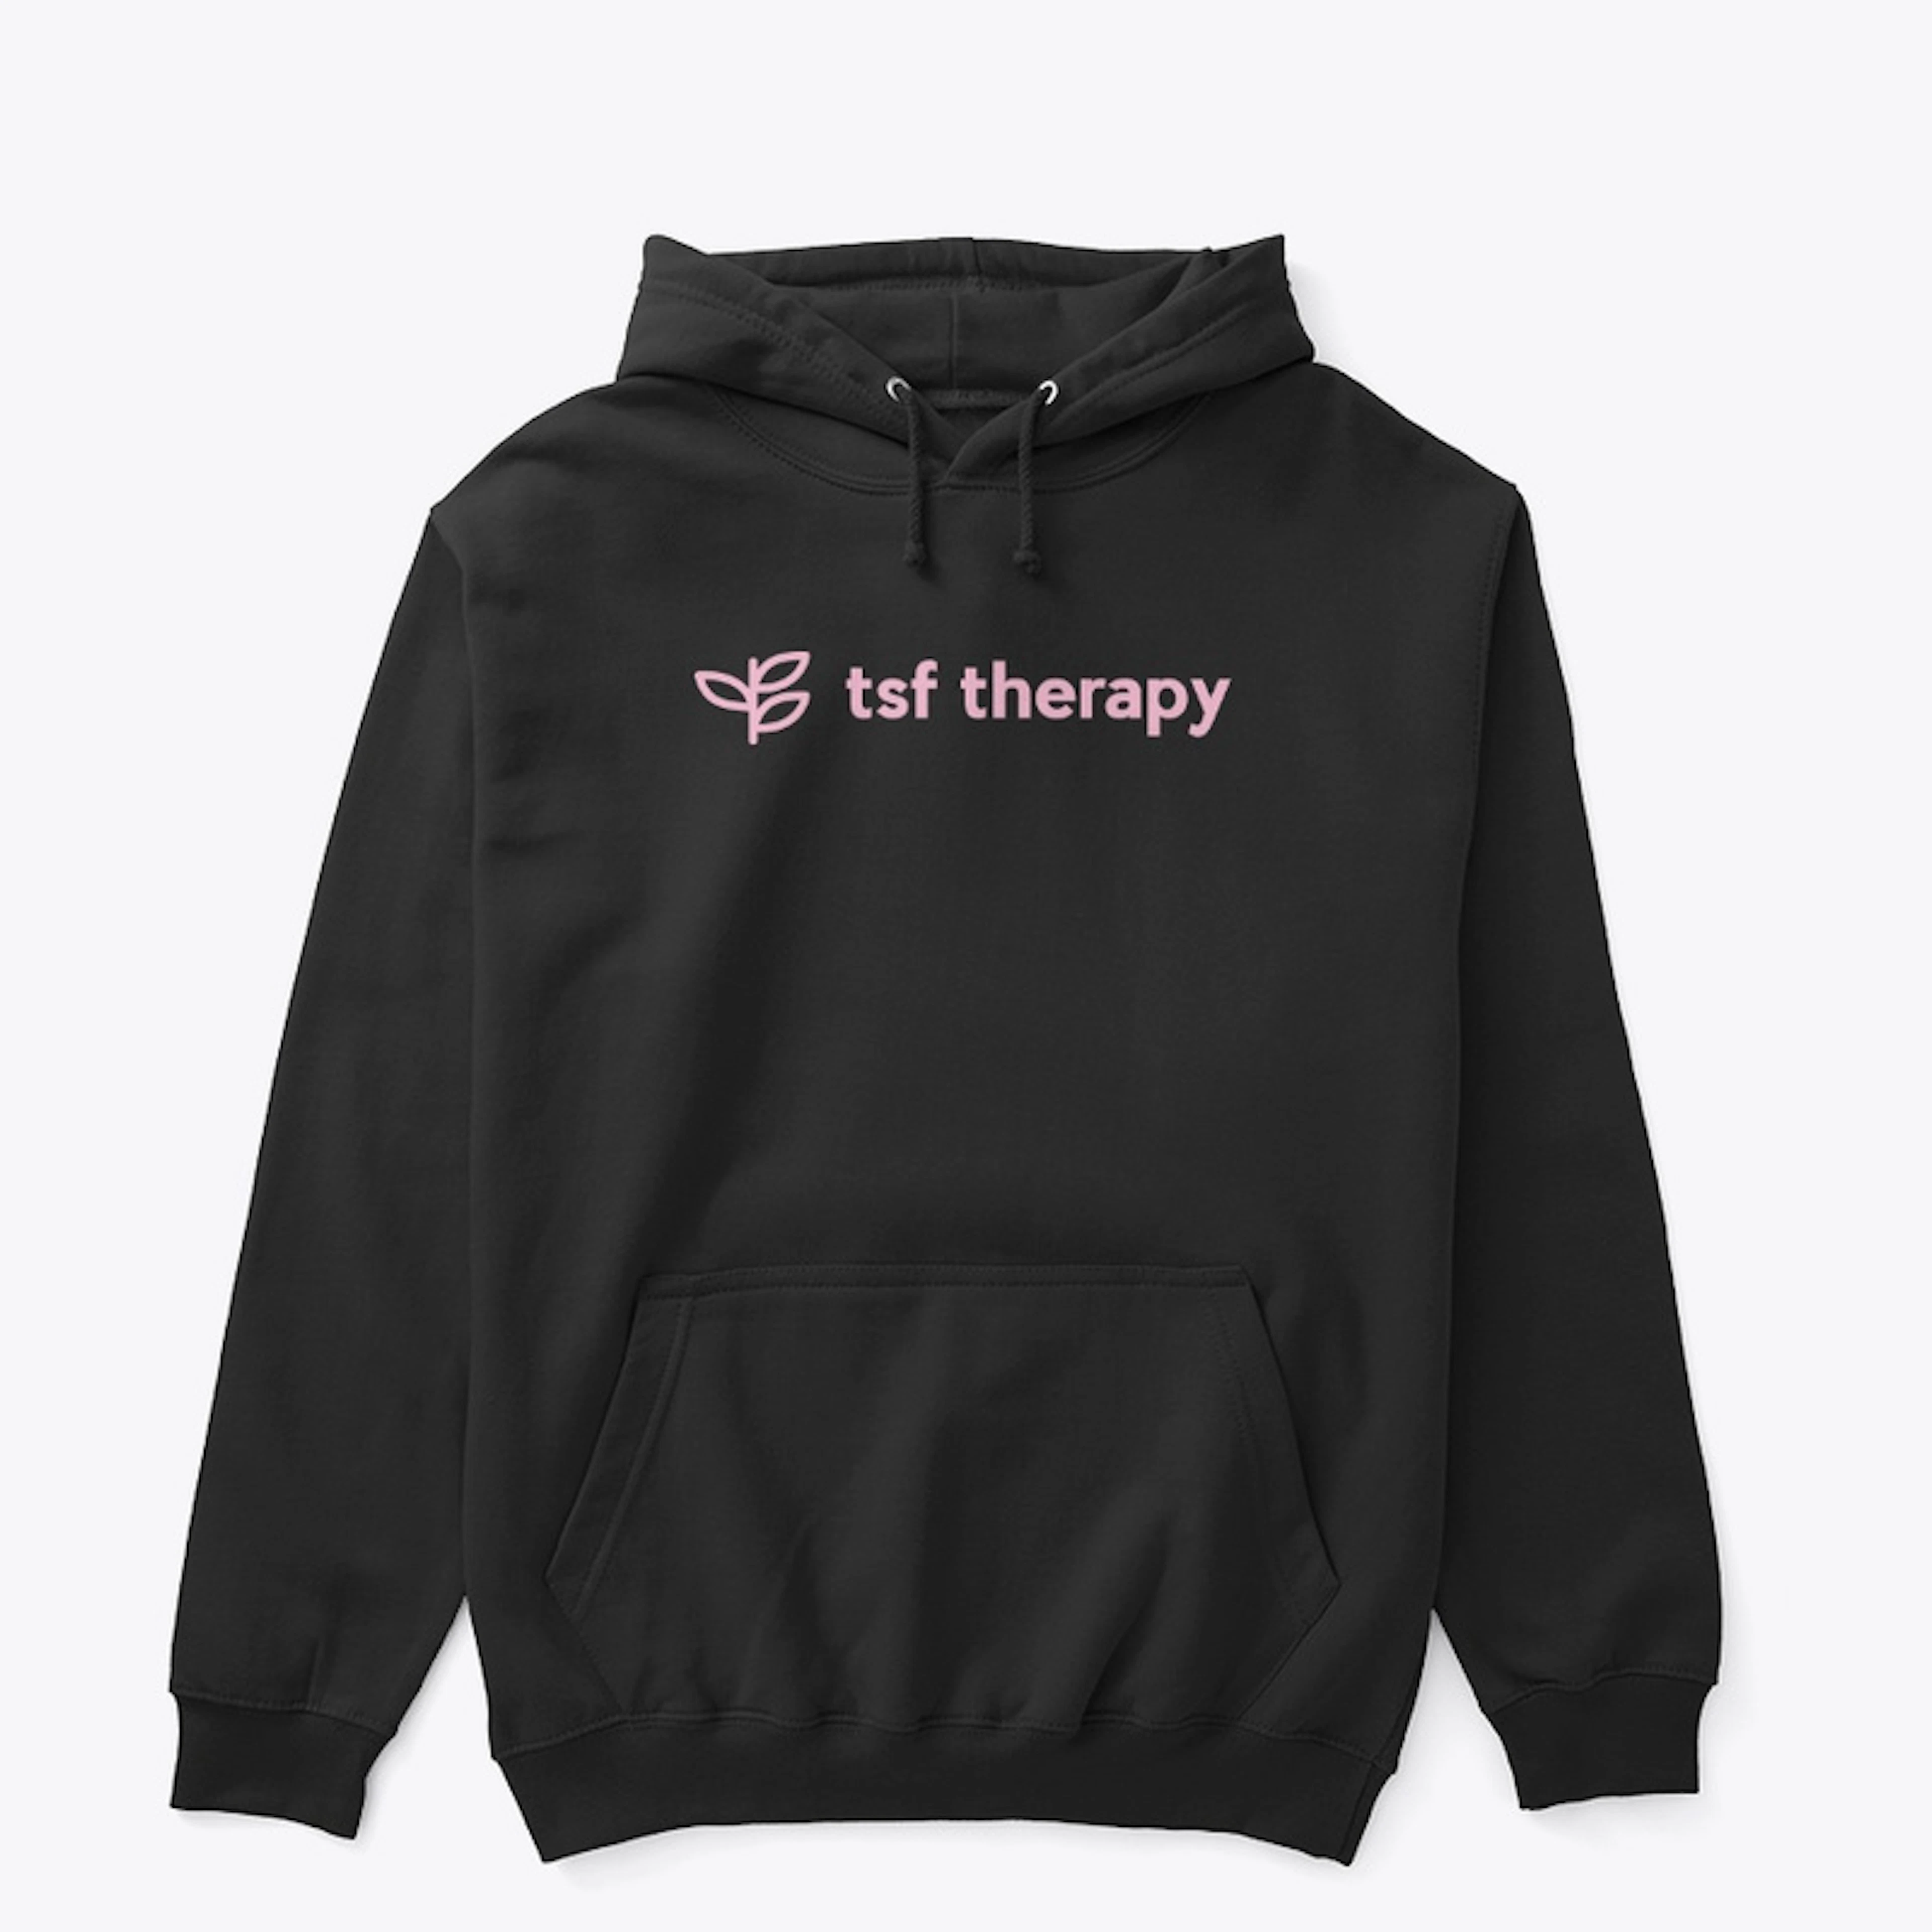 Therapy for dope girls!